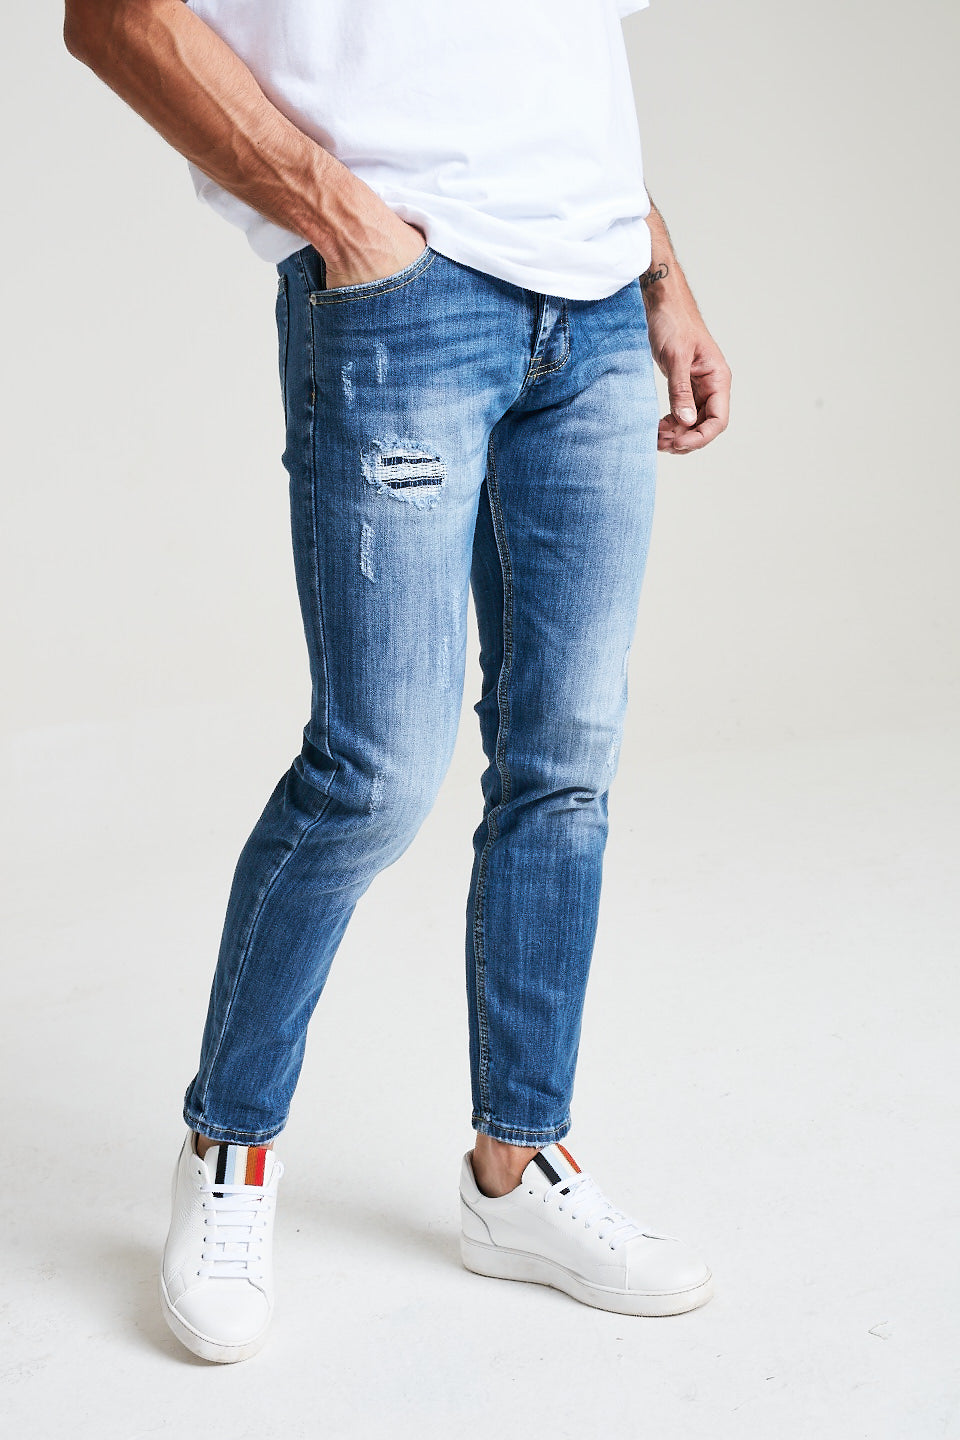 Classic Blue Jeans With Pocket Detail